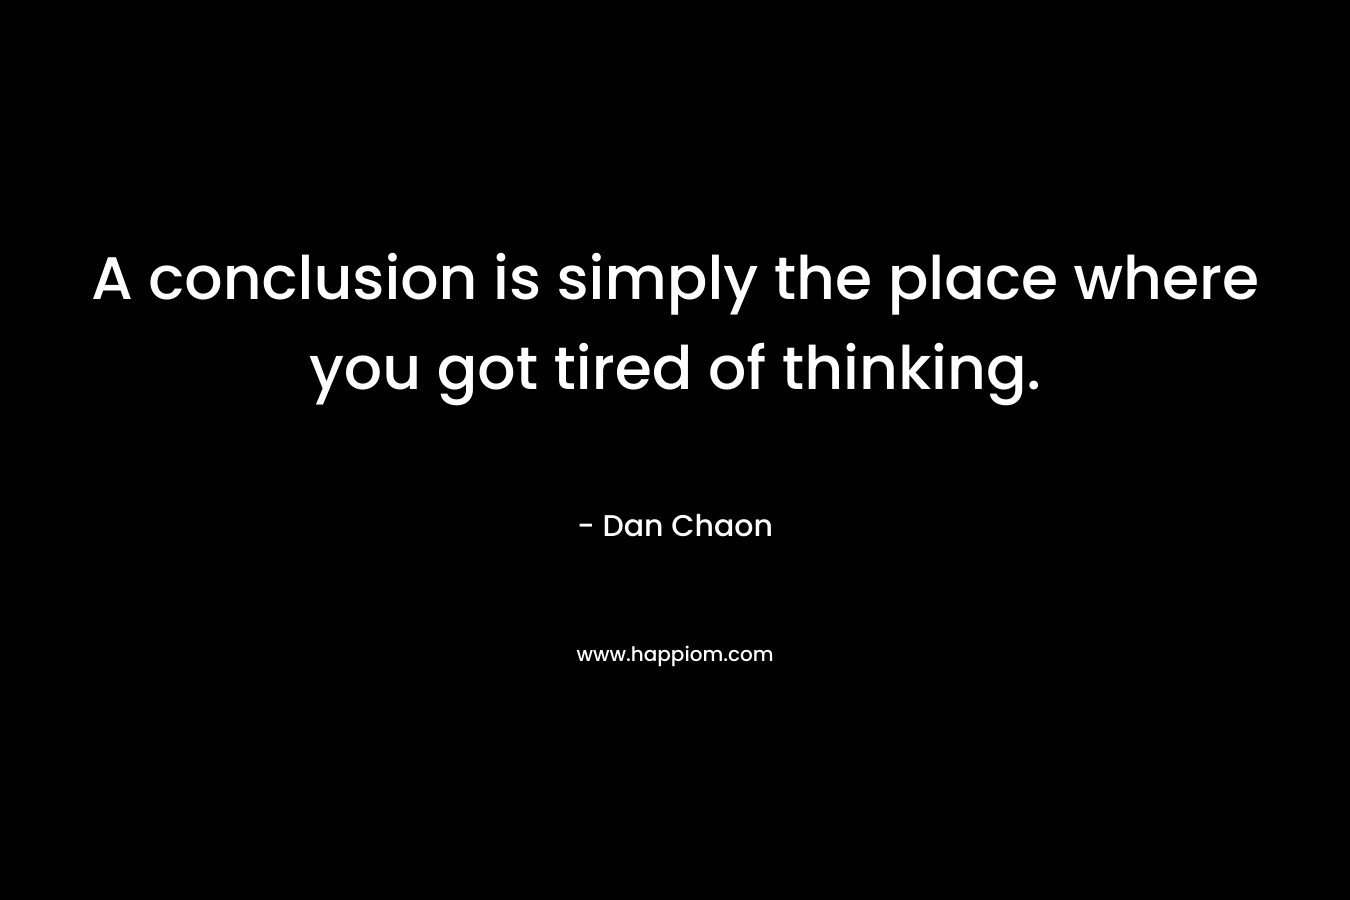 A conclusion is simply the place where you got tired of thinking.